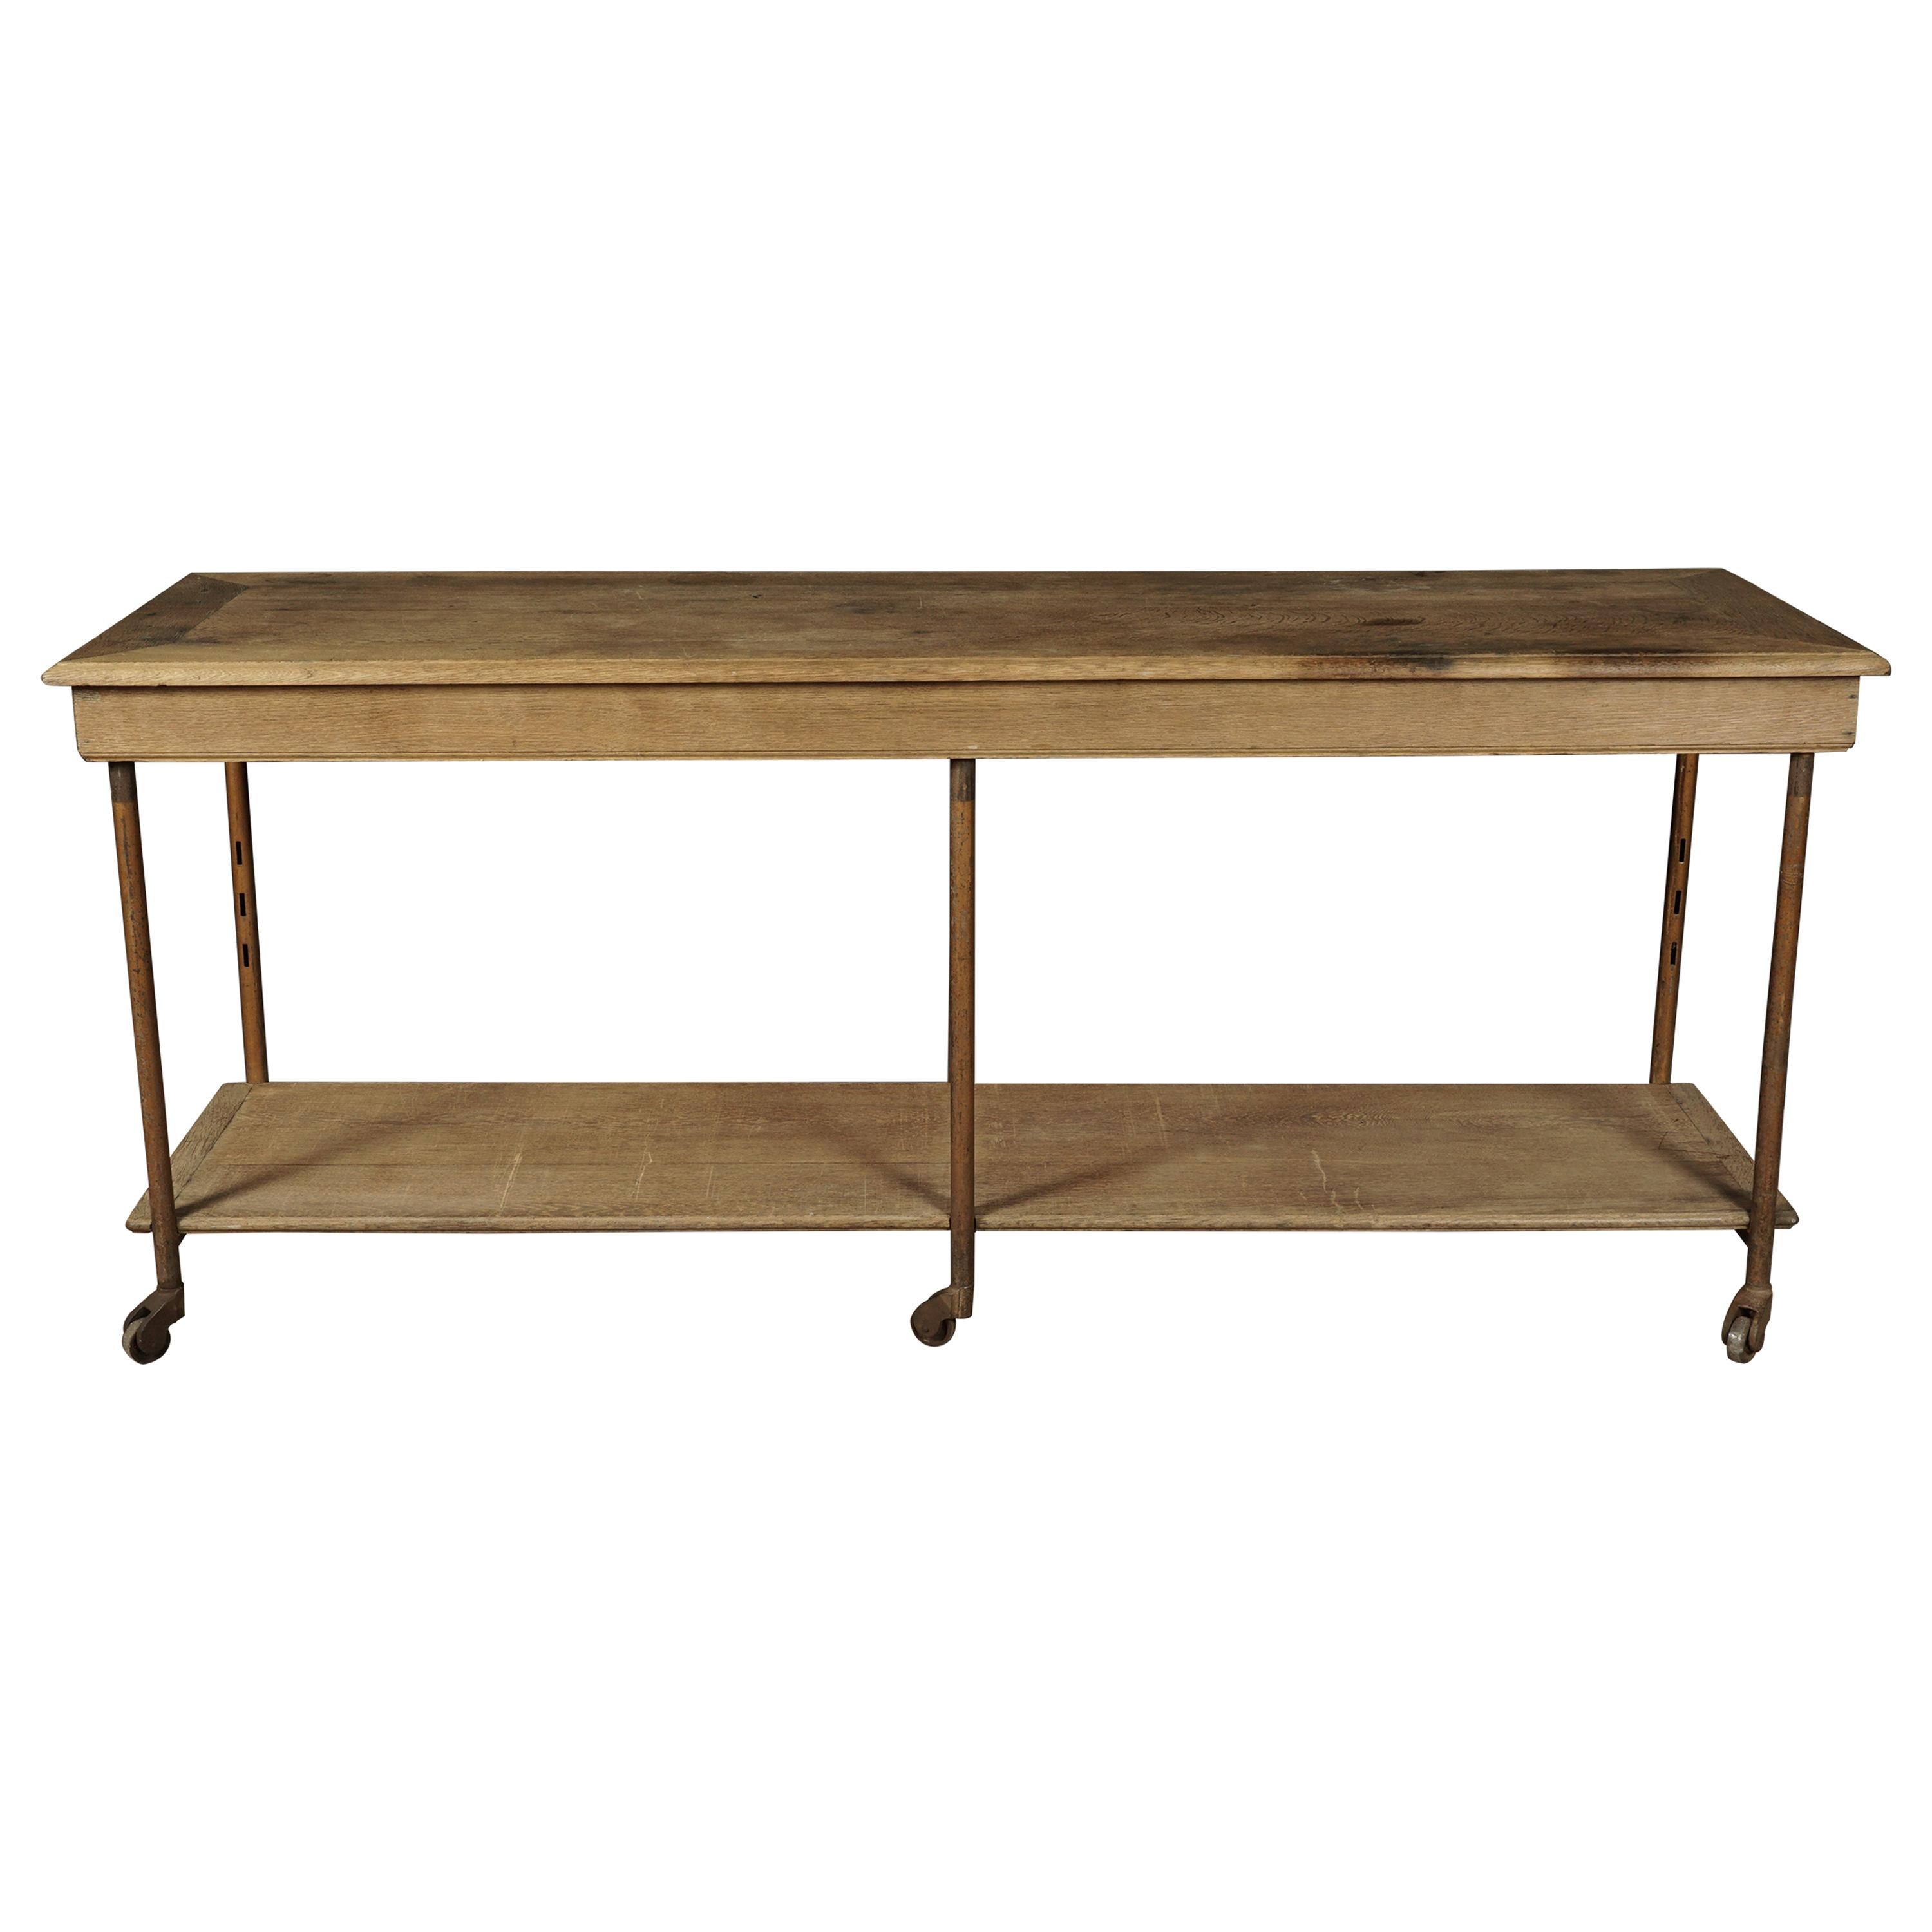 Early Oak Haberdashery Console Table from France, circa 1900